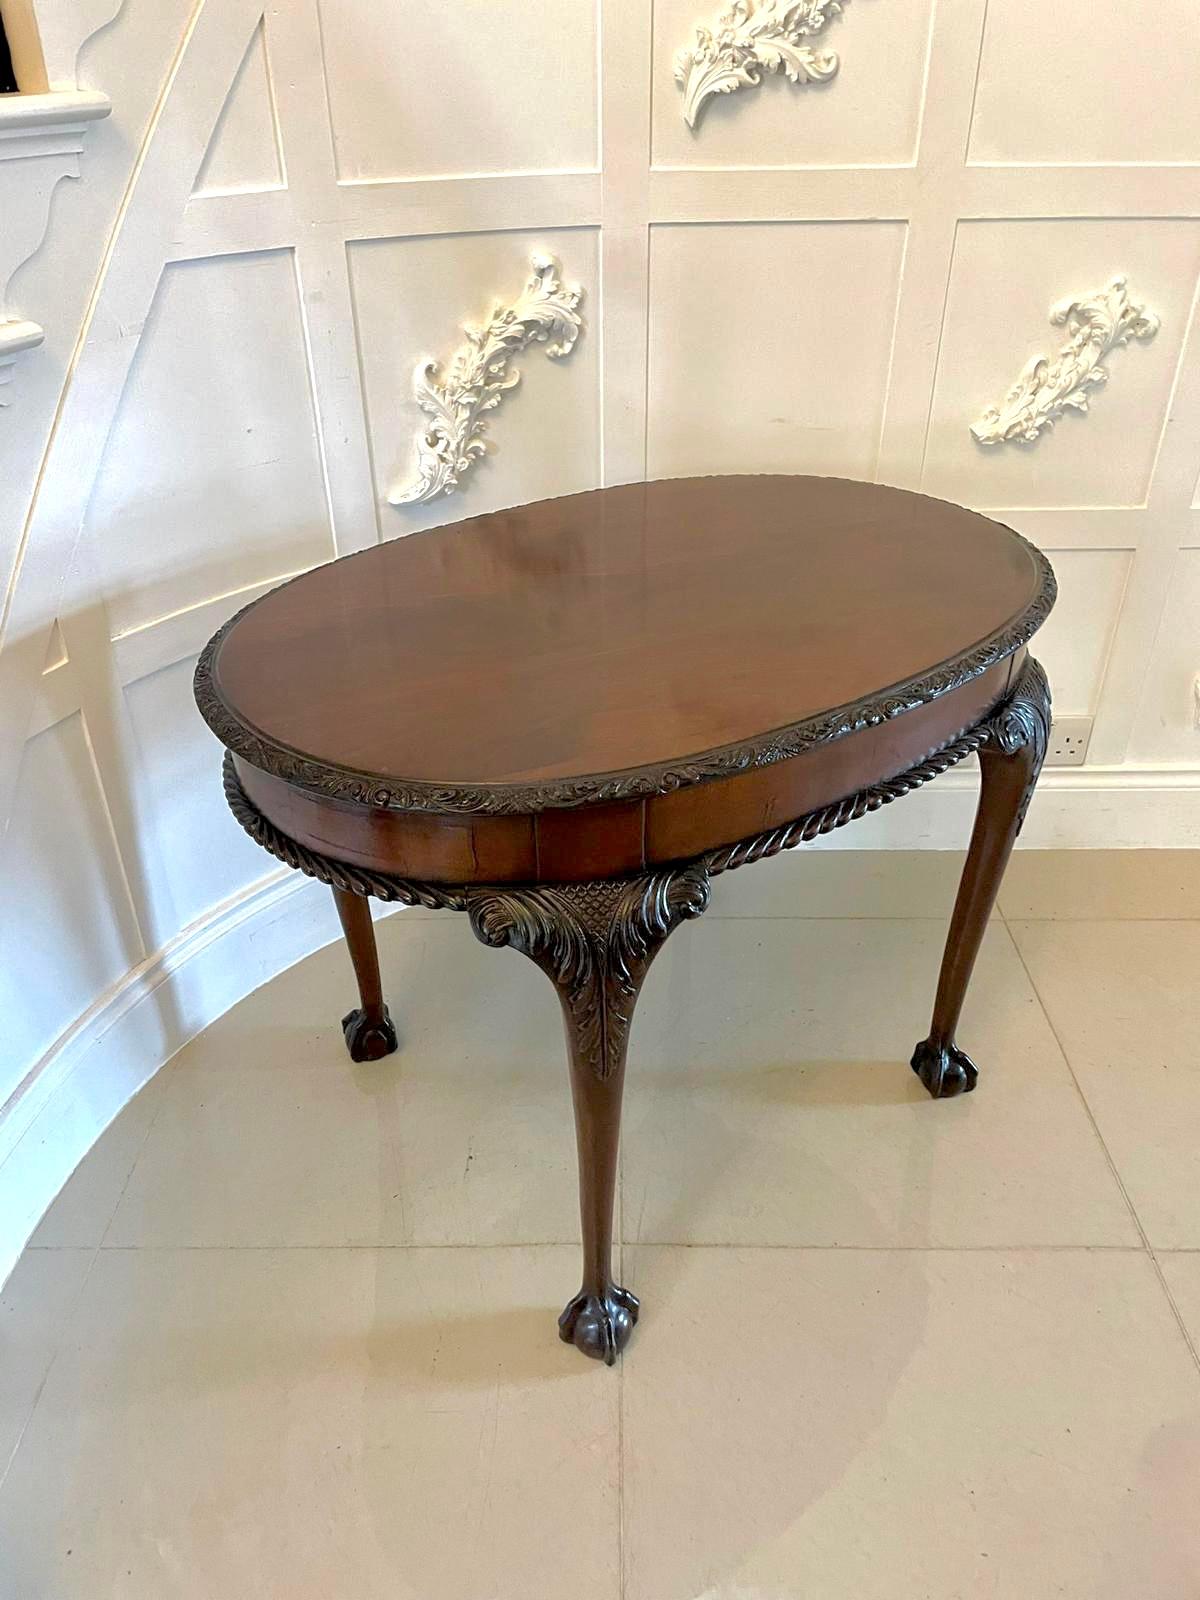 Antique oval carved mahogany centre table with a lovely figured mahogany top, carved moulded edge and mahogany apron with a gadrooned edge. It stands on four elegantly carved claws.

In lovely original condition and boasting a delightful colour
